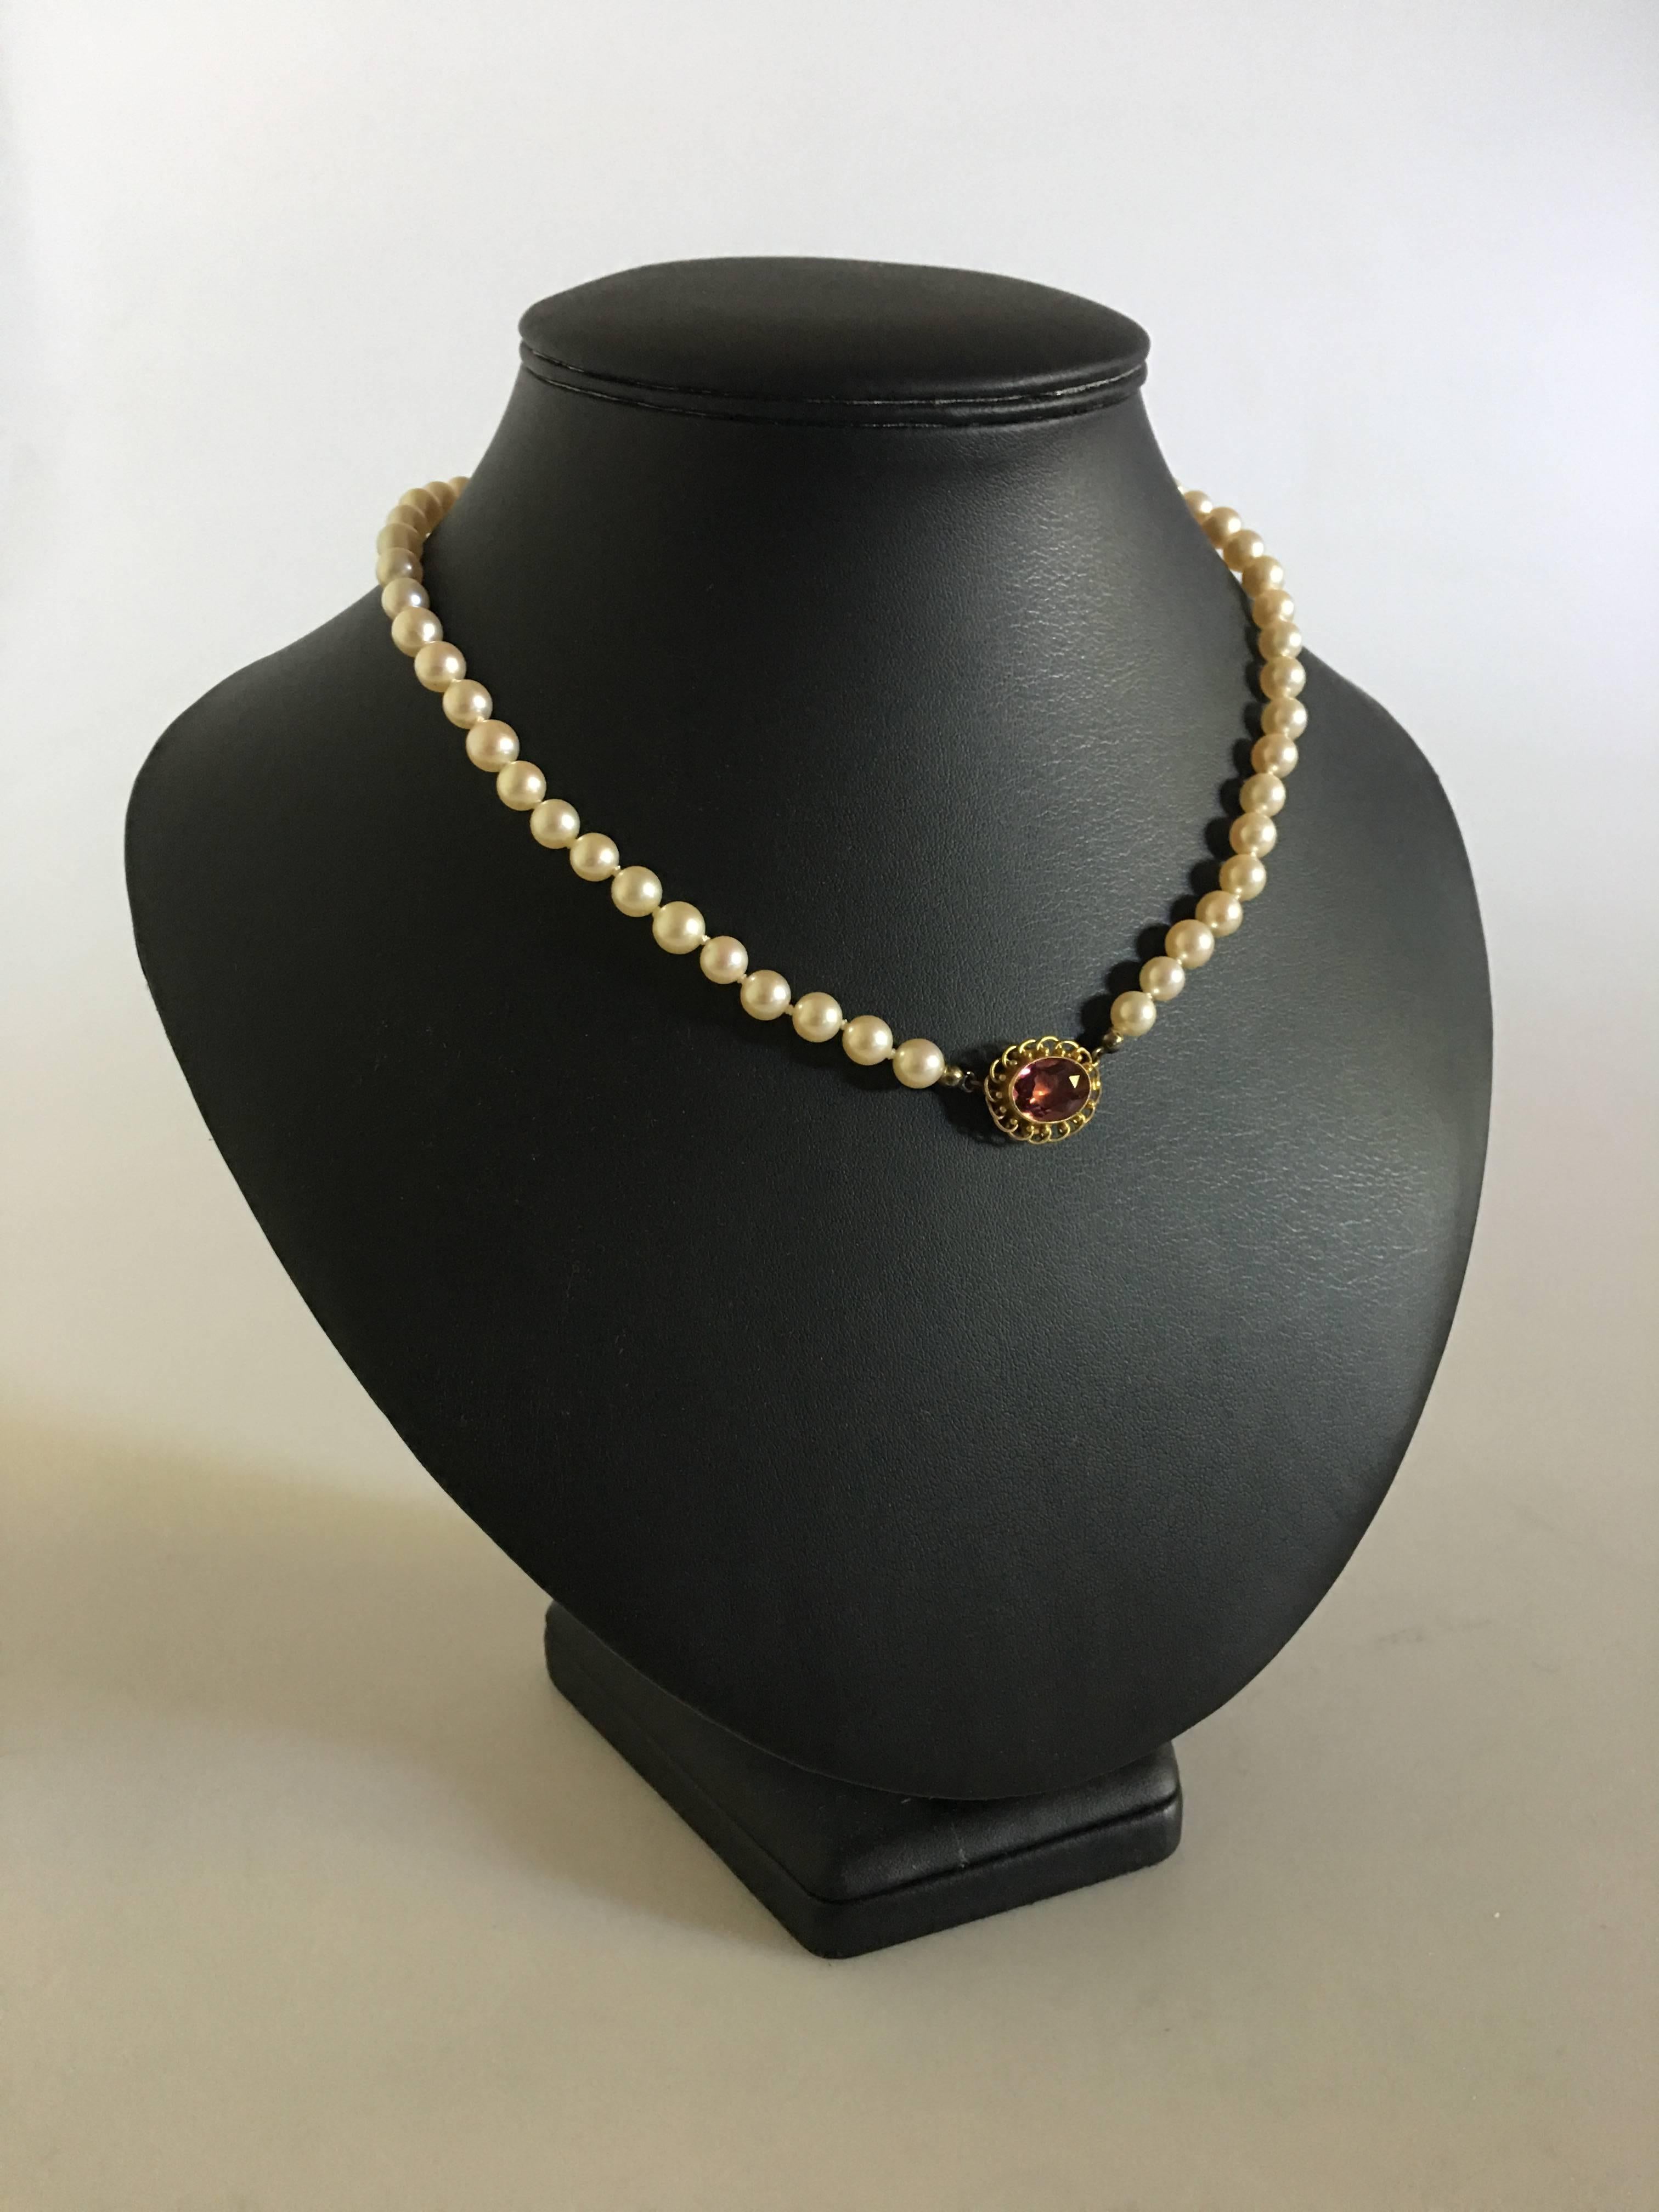 Georg Jensen Pearl Necklace with 18K Gold Lock / Jewelry Pendant with Rosa Quartz. The necklace is 42 cm L (16 17/32